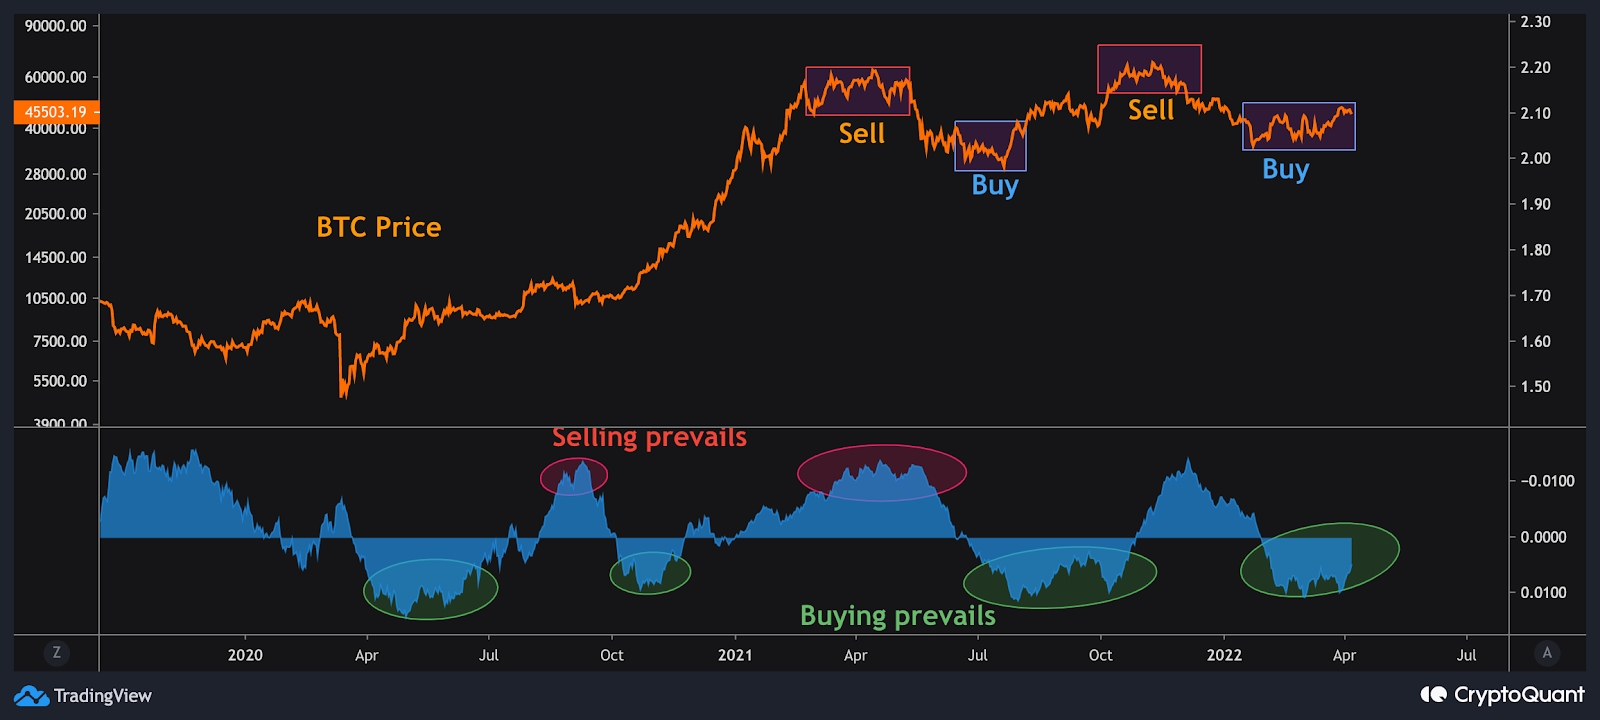 MACD Wave Traded Buy and Sell Ratio: